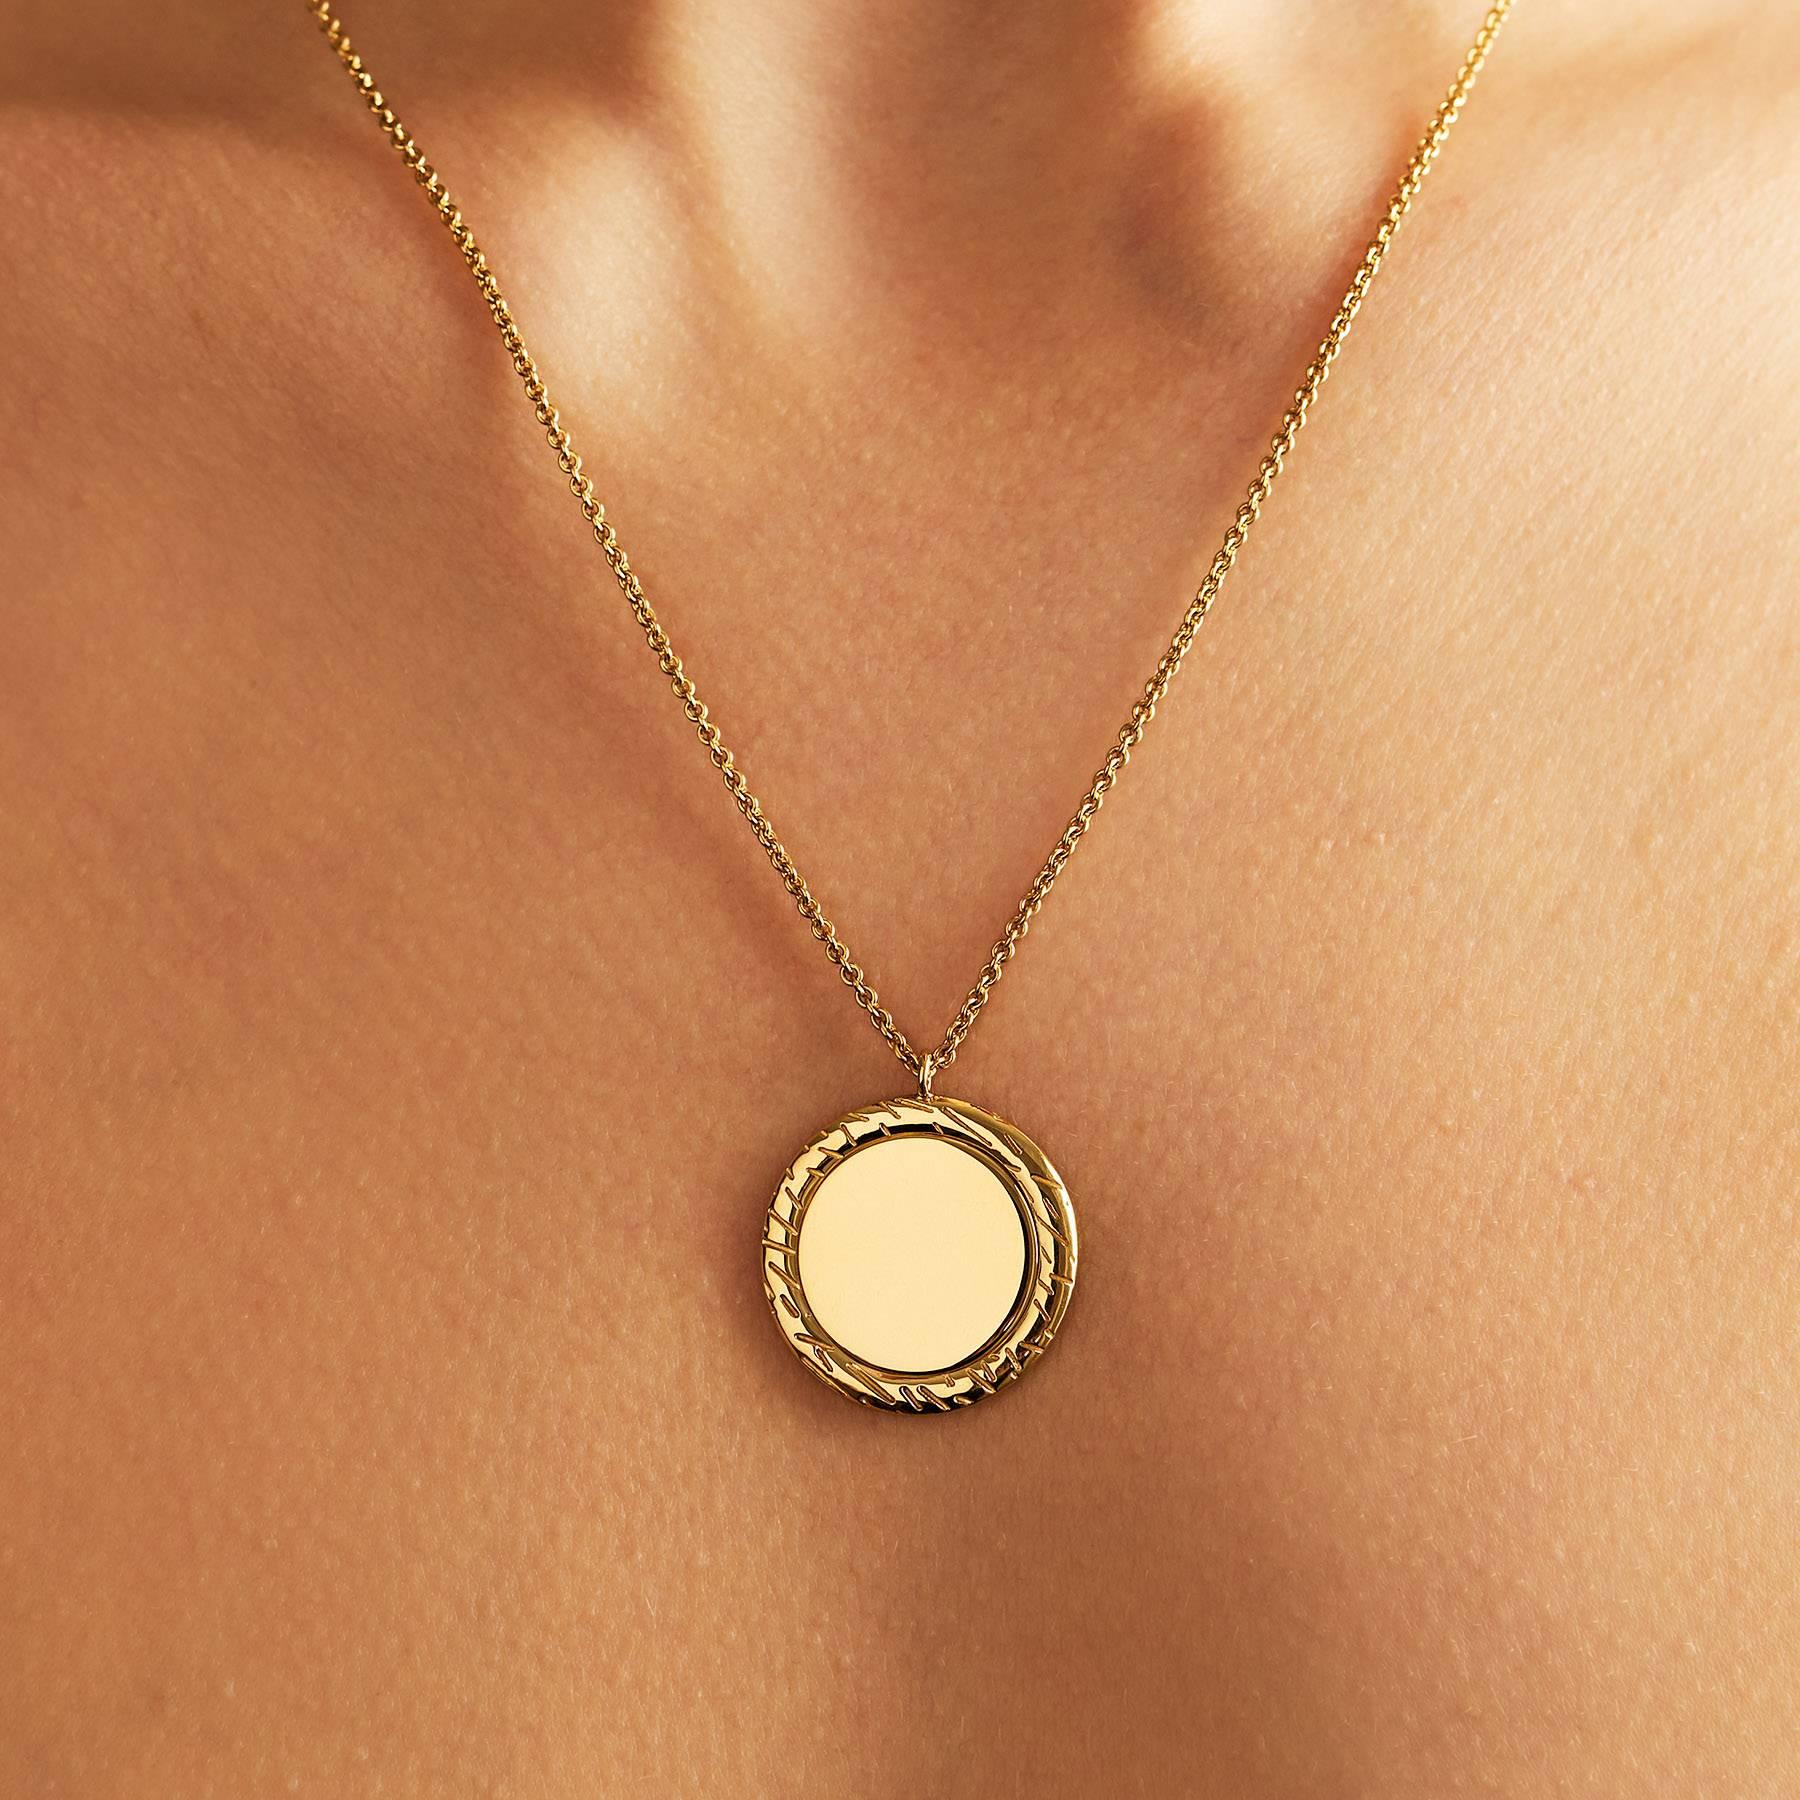 18ct yellow gold necklace with fur texture engraving and plain disc pendant
Fully adjustable length chain; sizes 18” and 22”* available
Closed Circle diameter measuring 21mm                                           
Made in London

Engraving